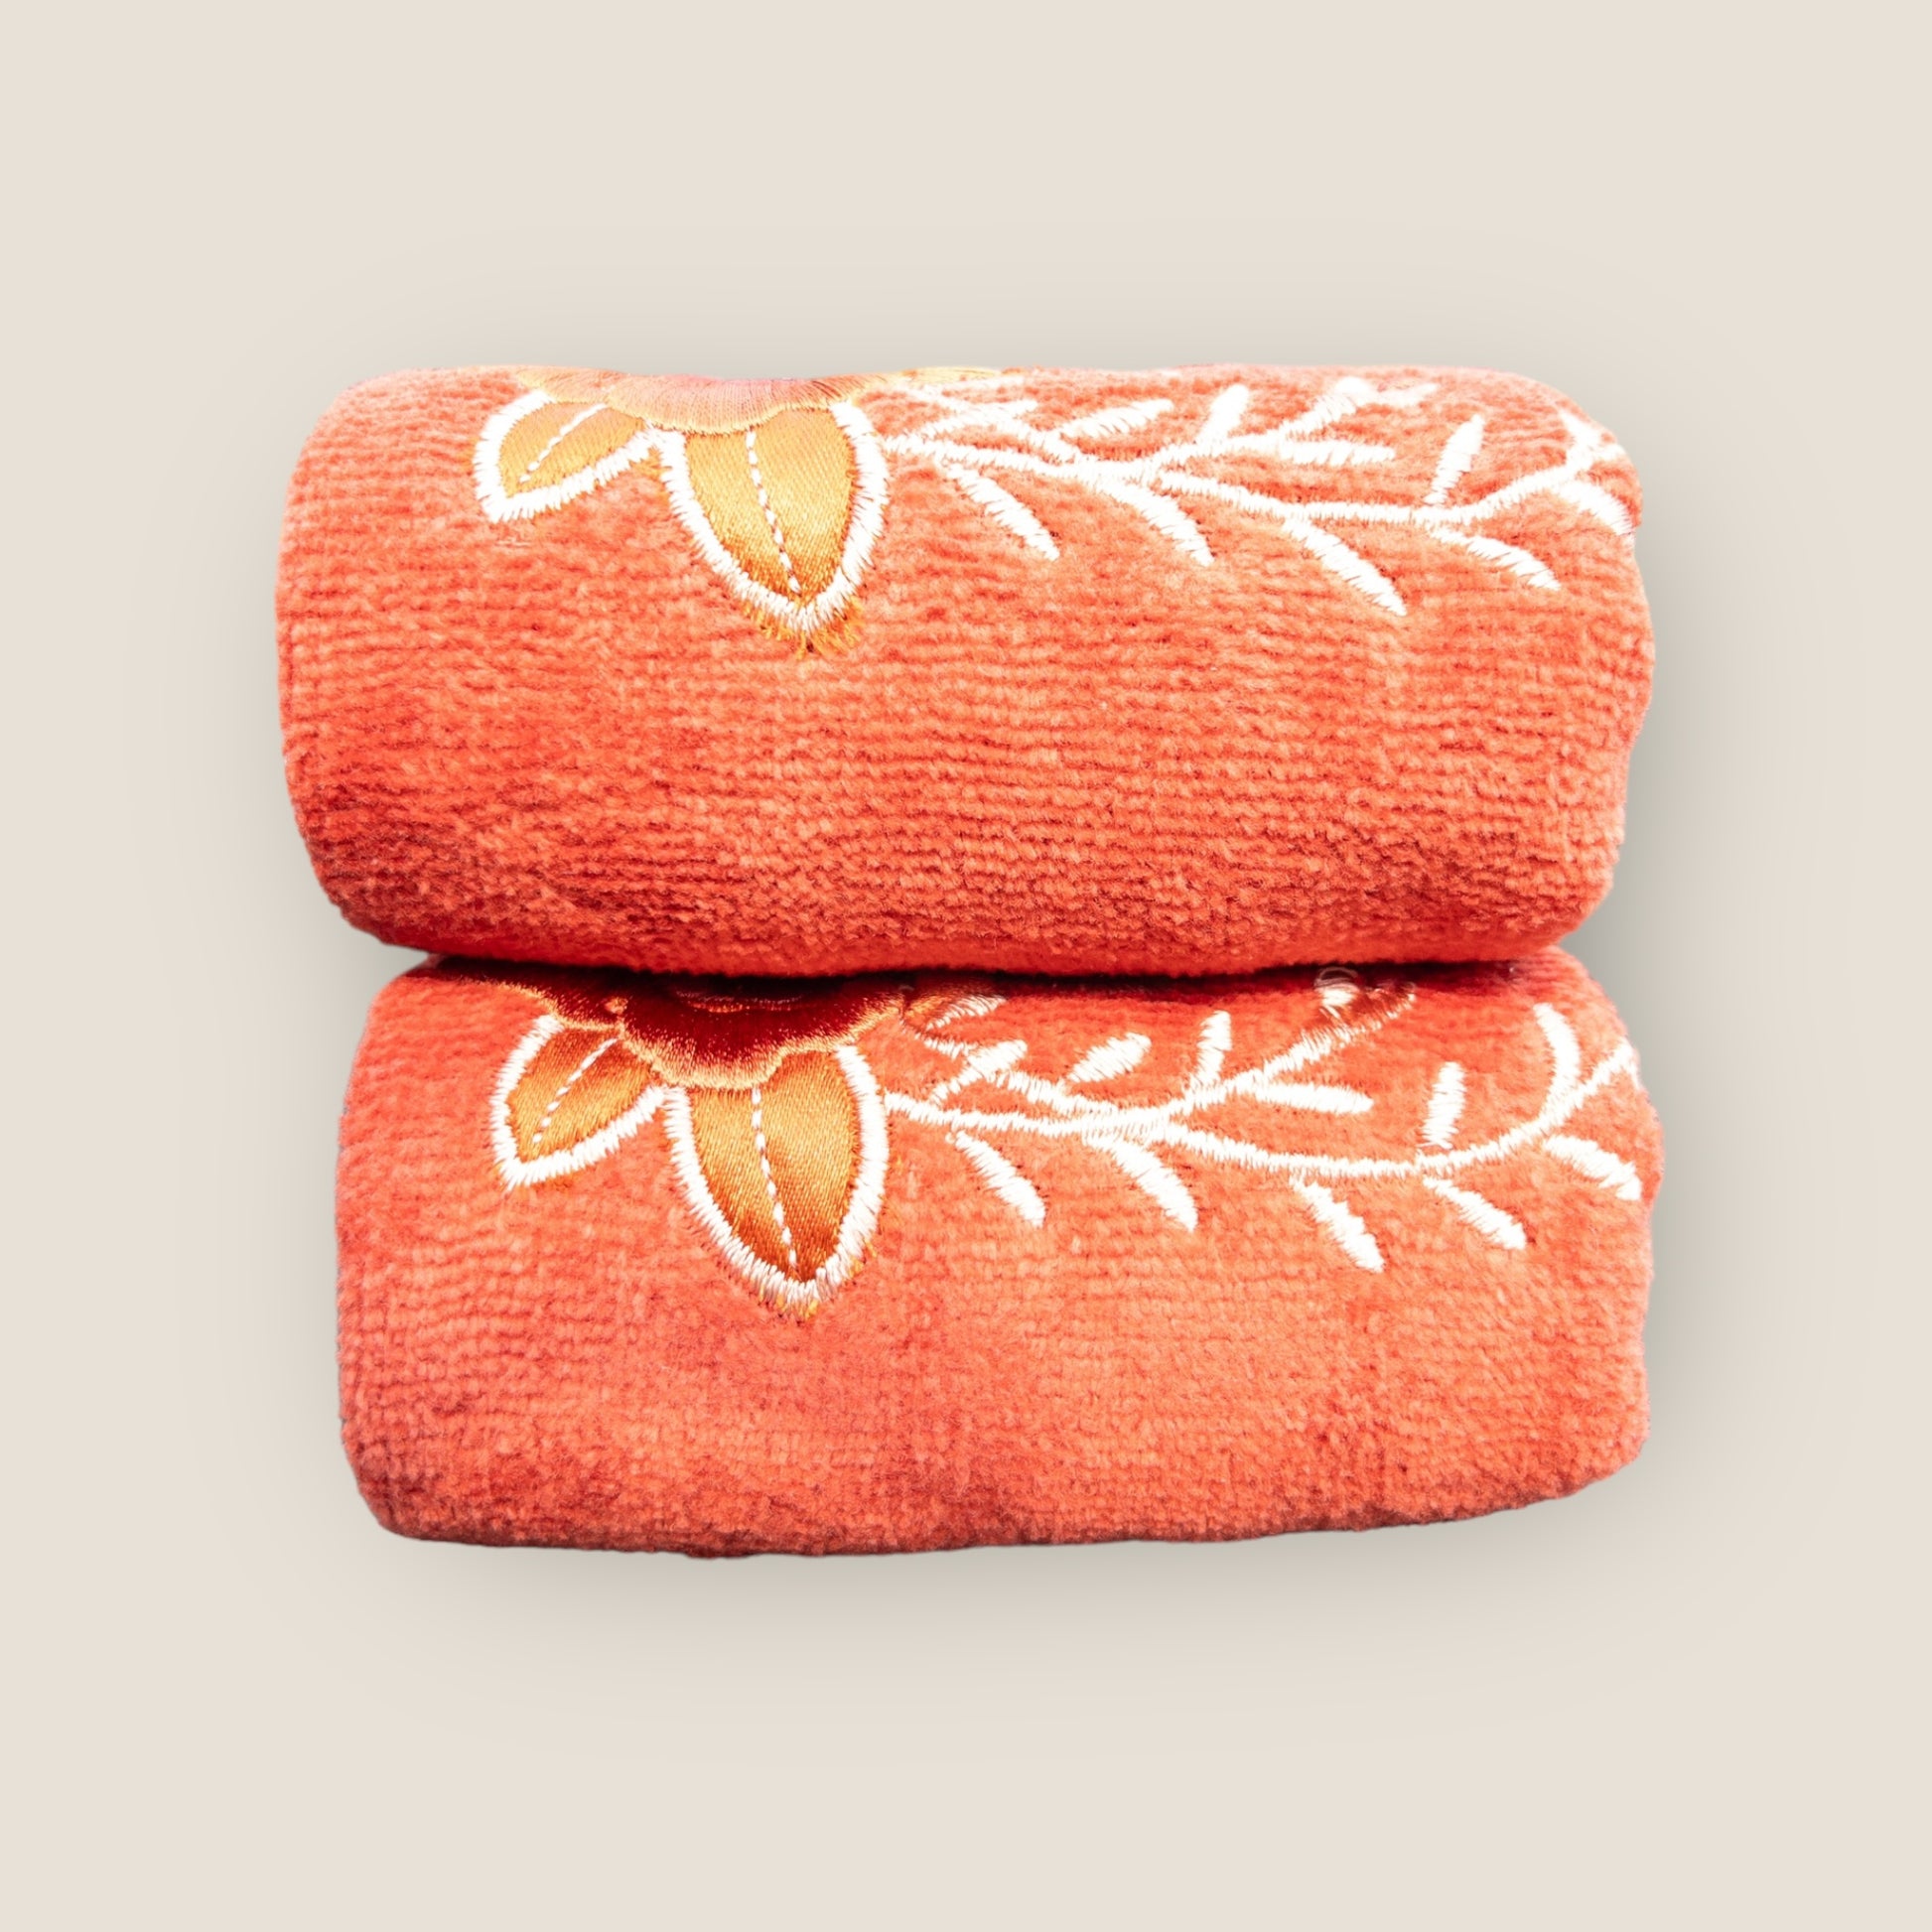 Two orange folded hand towels with big embroidered flowers made on it, stacked